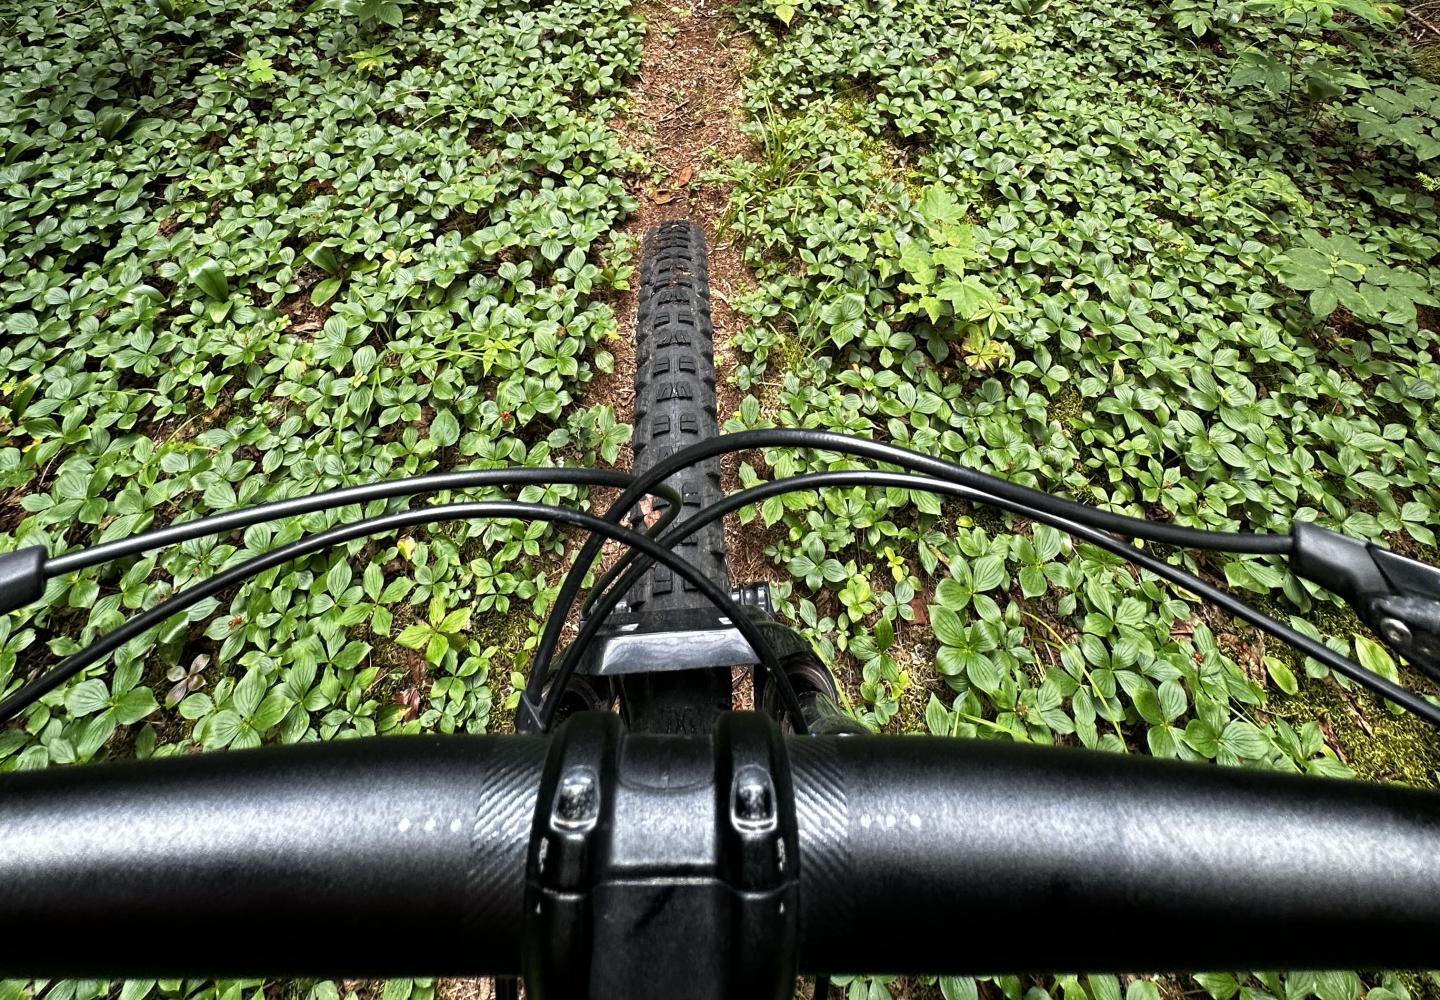 Imagining an off-road way to travel by bike from Keene to Saranac Lake.